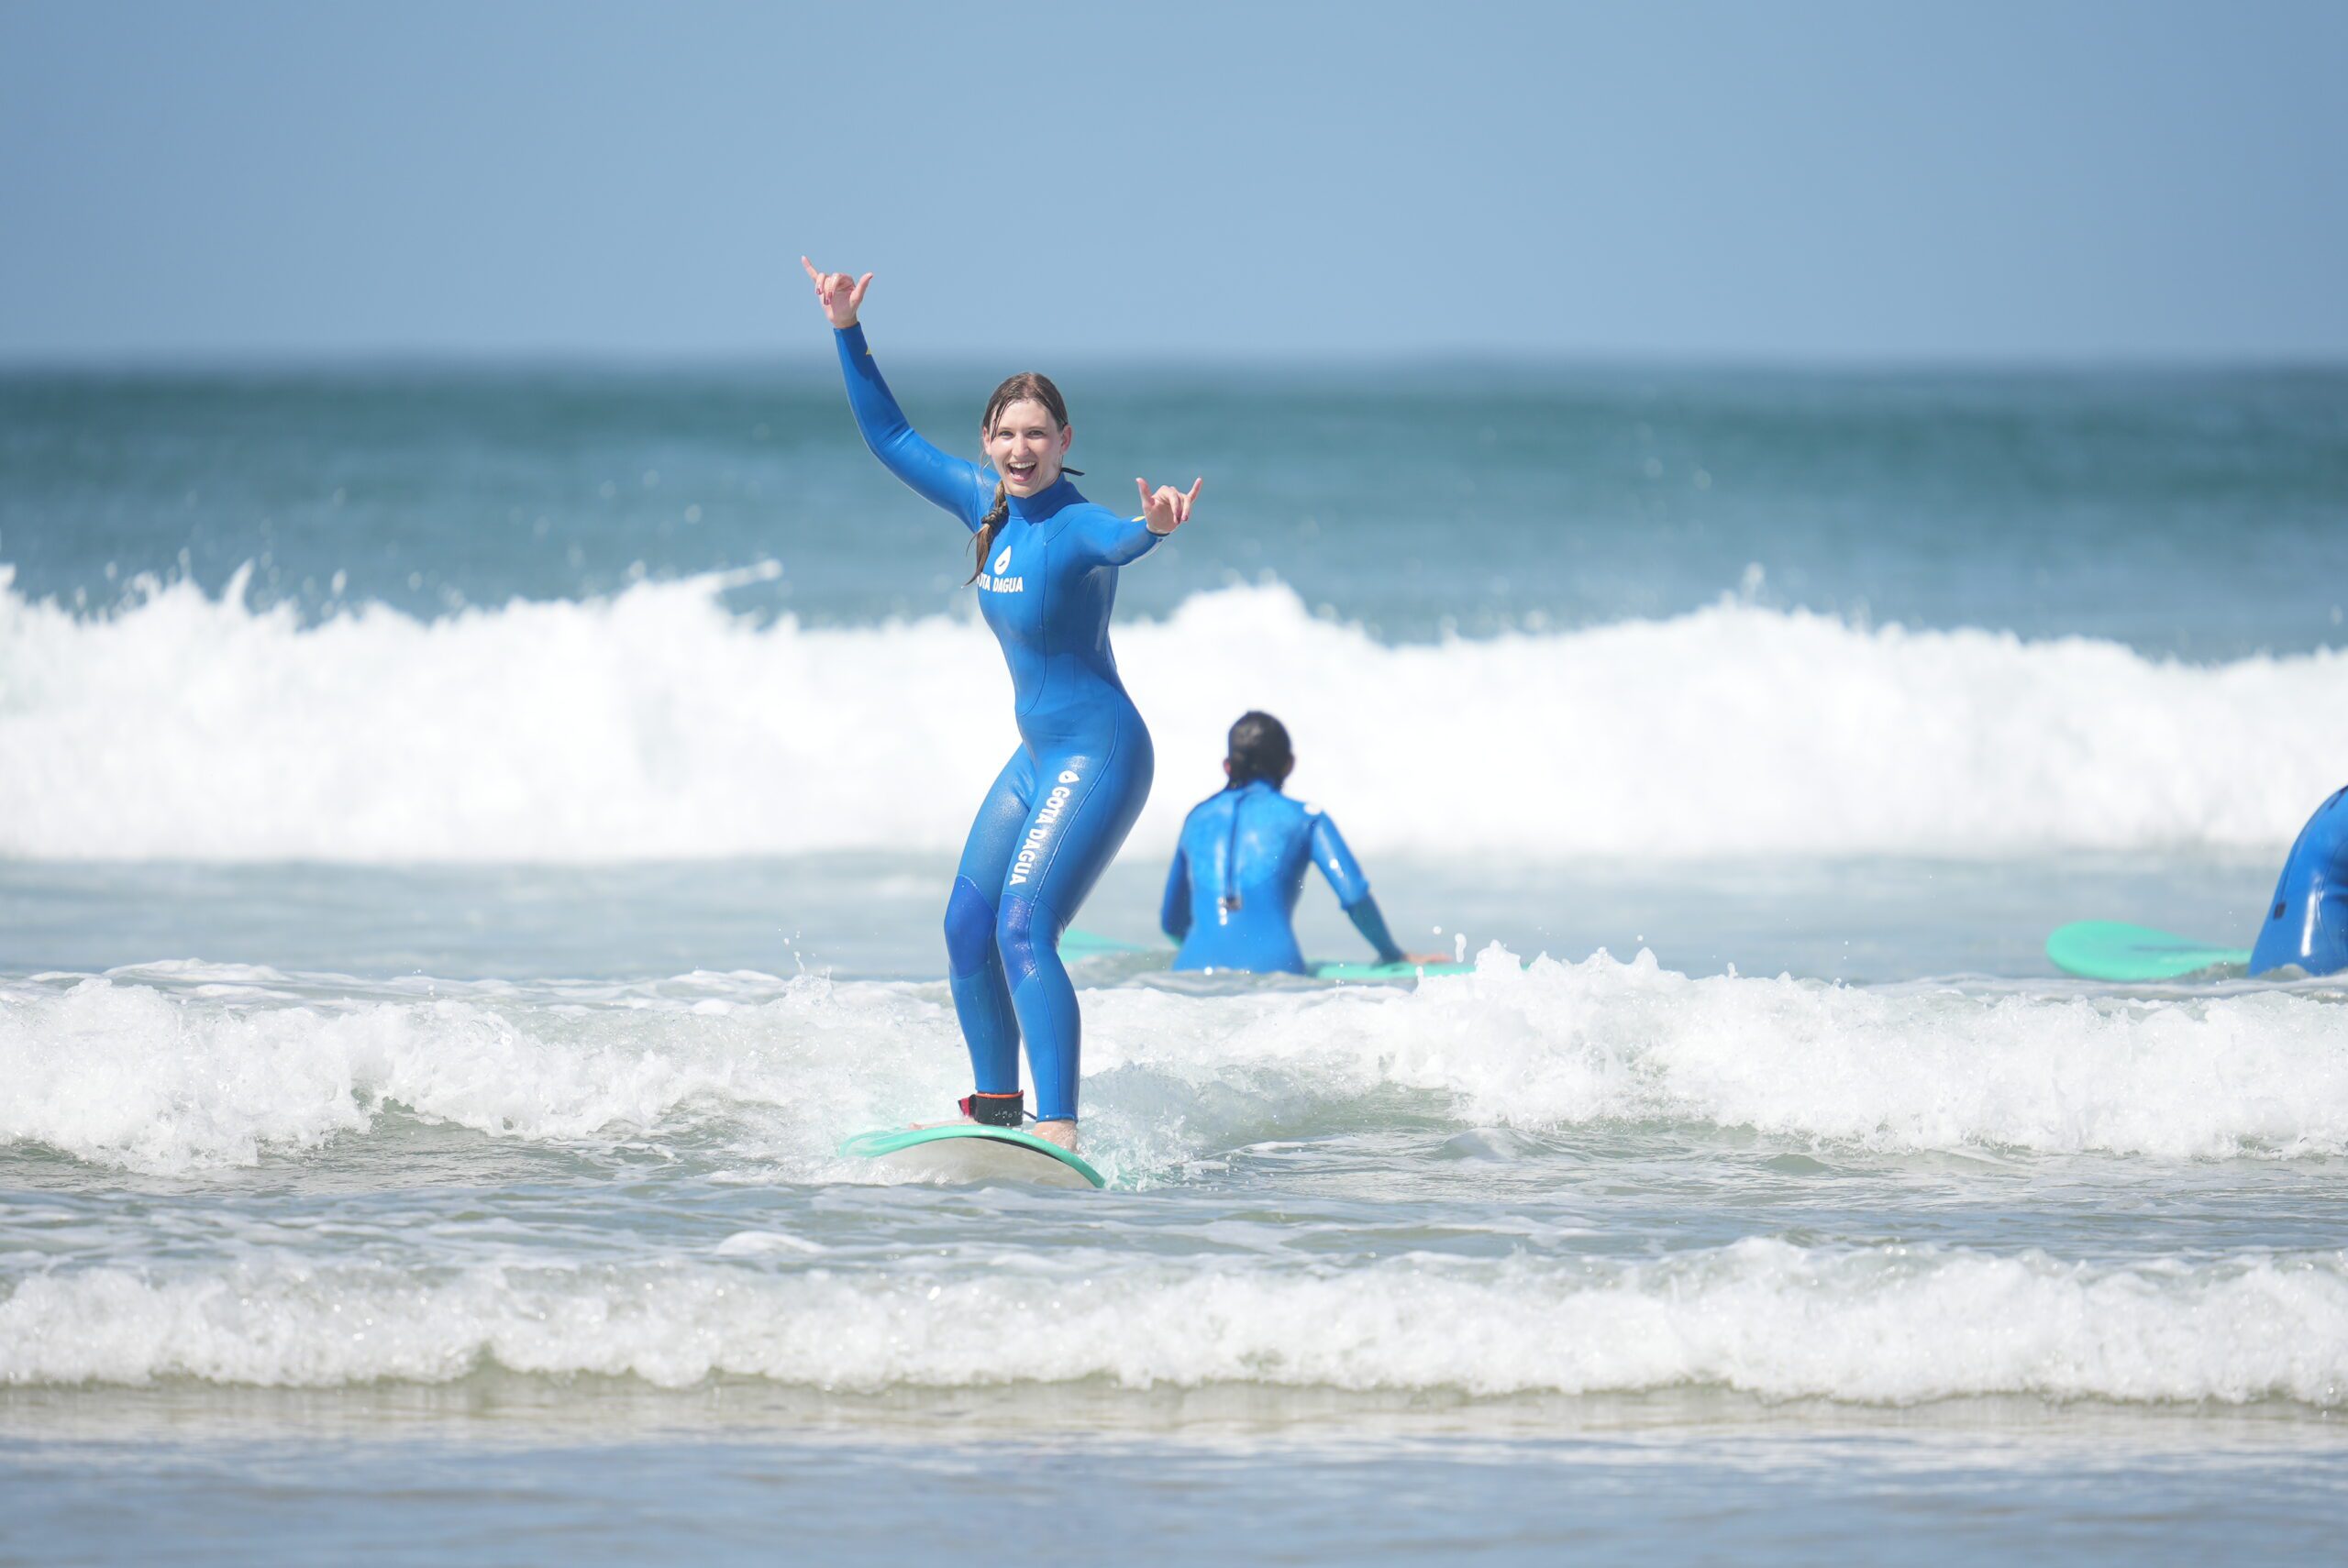 A girl catching a wave in a surf lesson